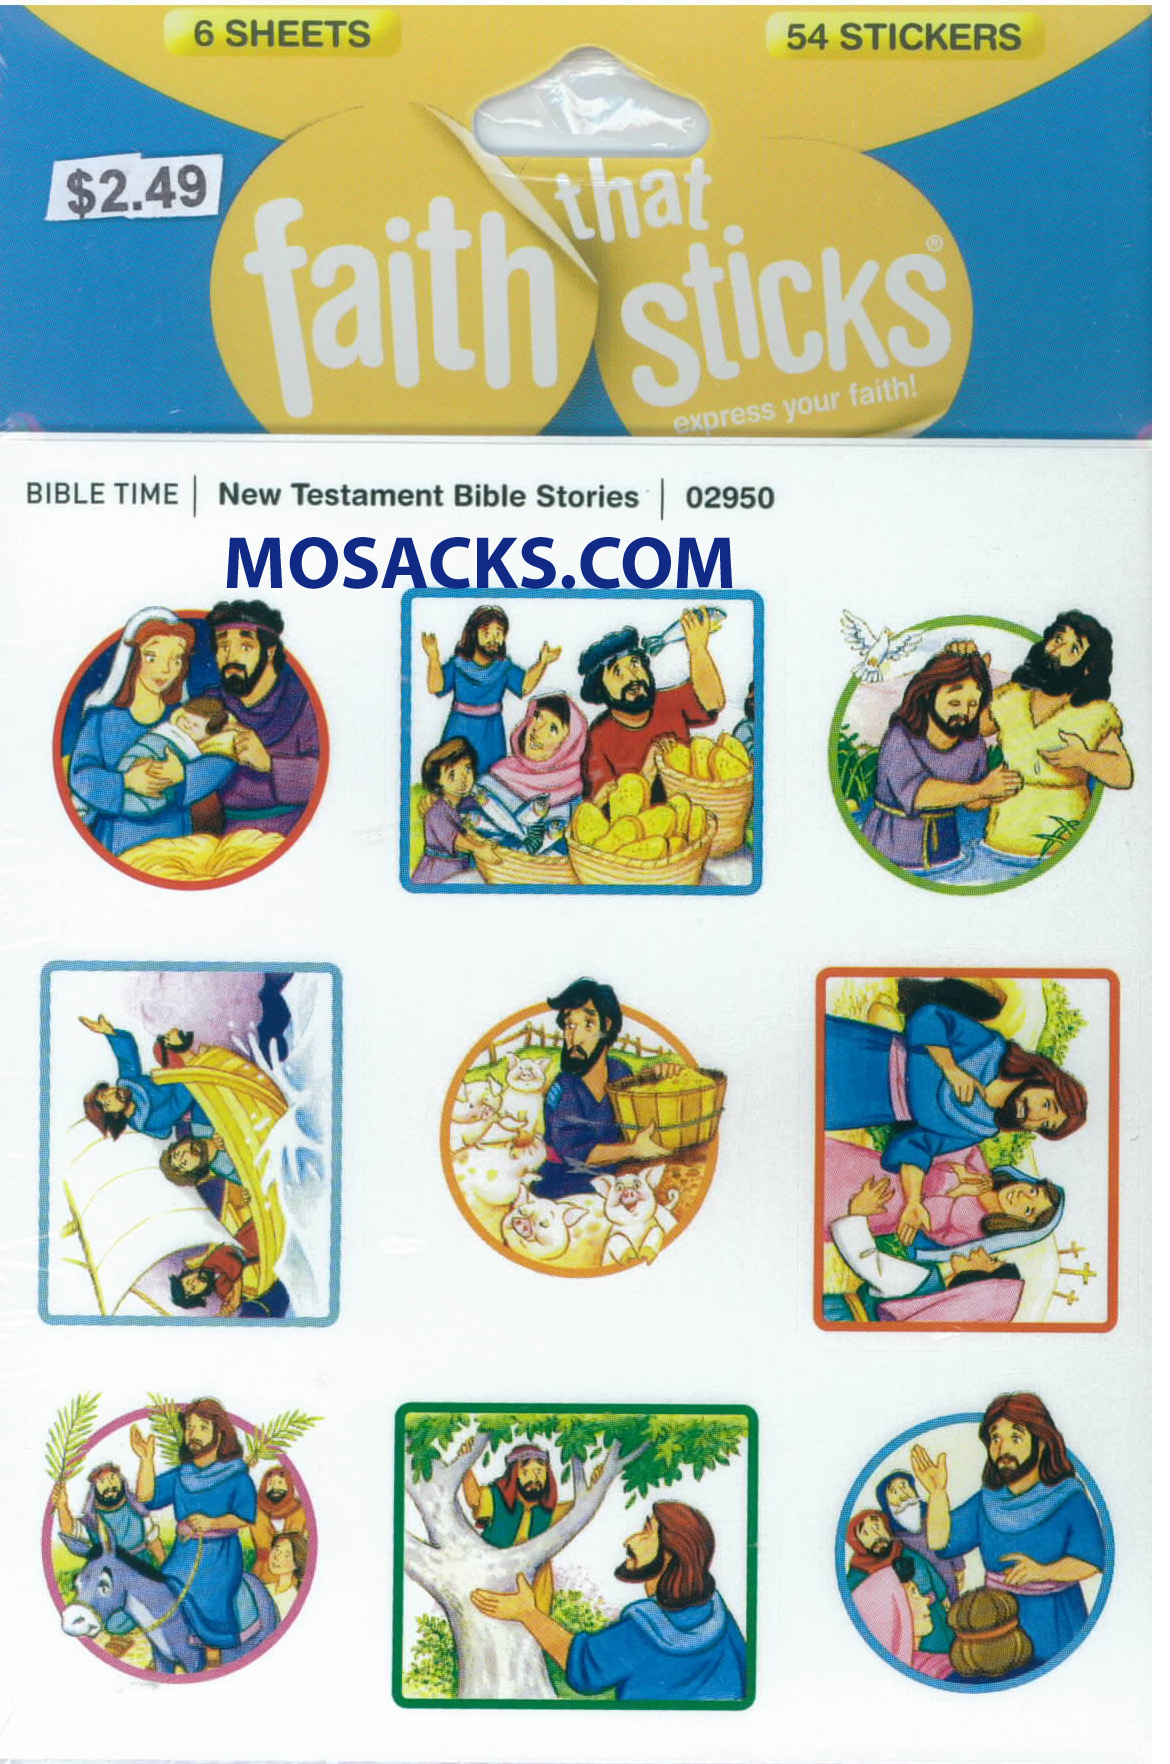 Christian Stickers & Catholic Stickers Faith That Sticks New Testament Bible Stories 87-02950 includes 6 New Testament sticker sheets